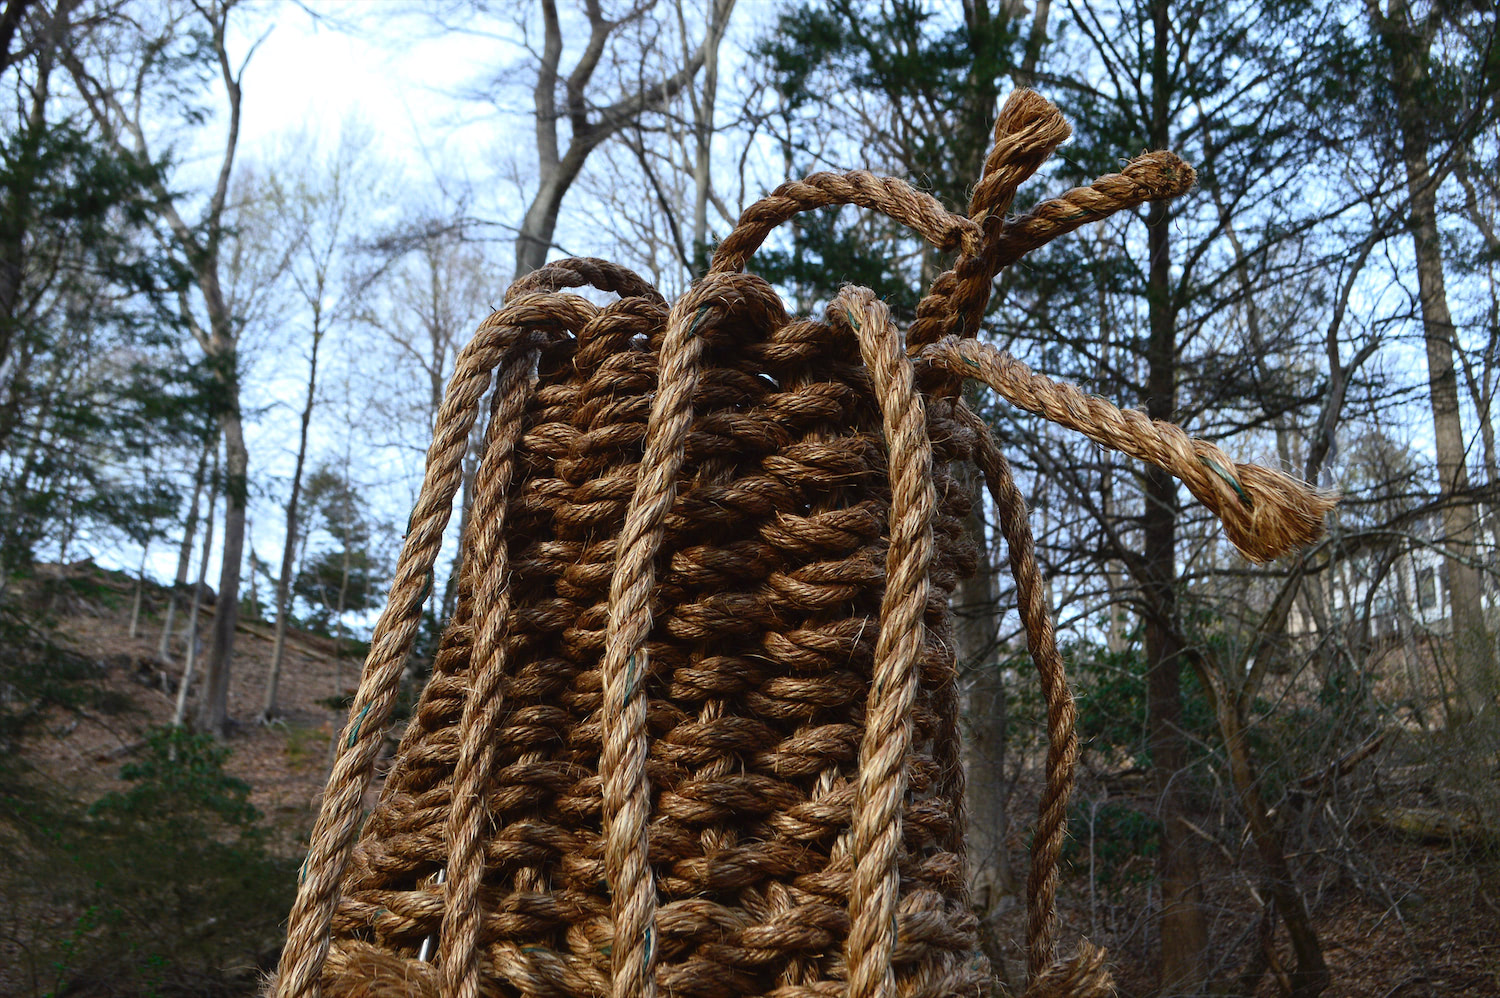 This detail shot captures the top few rows of the basket as well as the dangling frayed warp. The edges of the vertical rope segments are not tucked into the basket, allowing for the weaving process to continue infinitely as additional material is inserted into the structure.